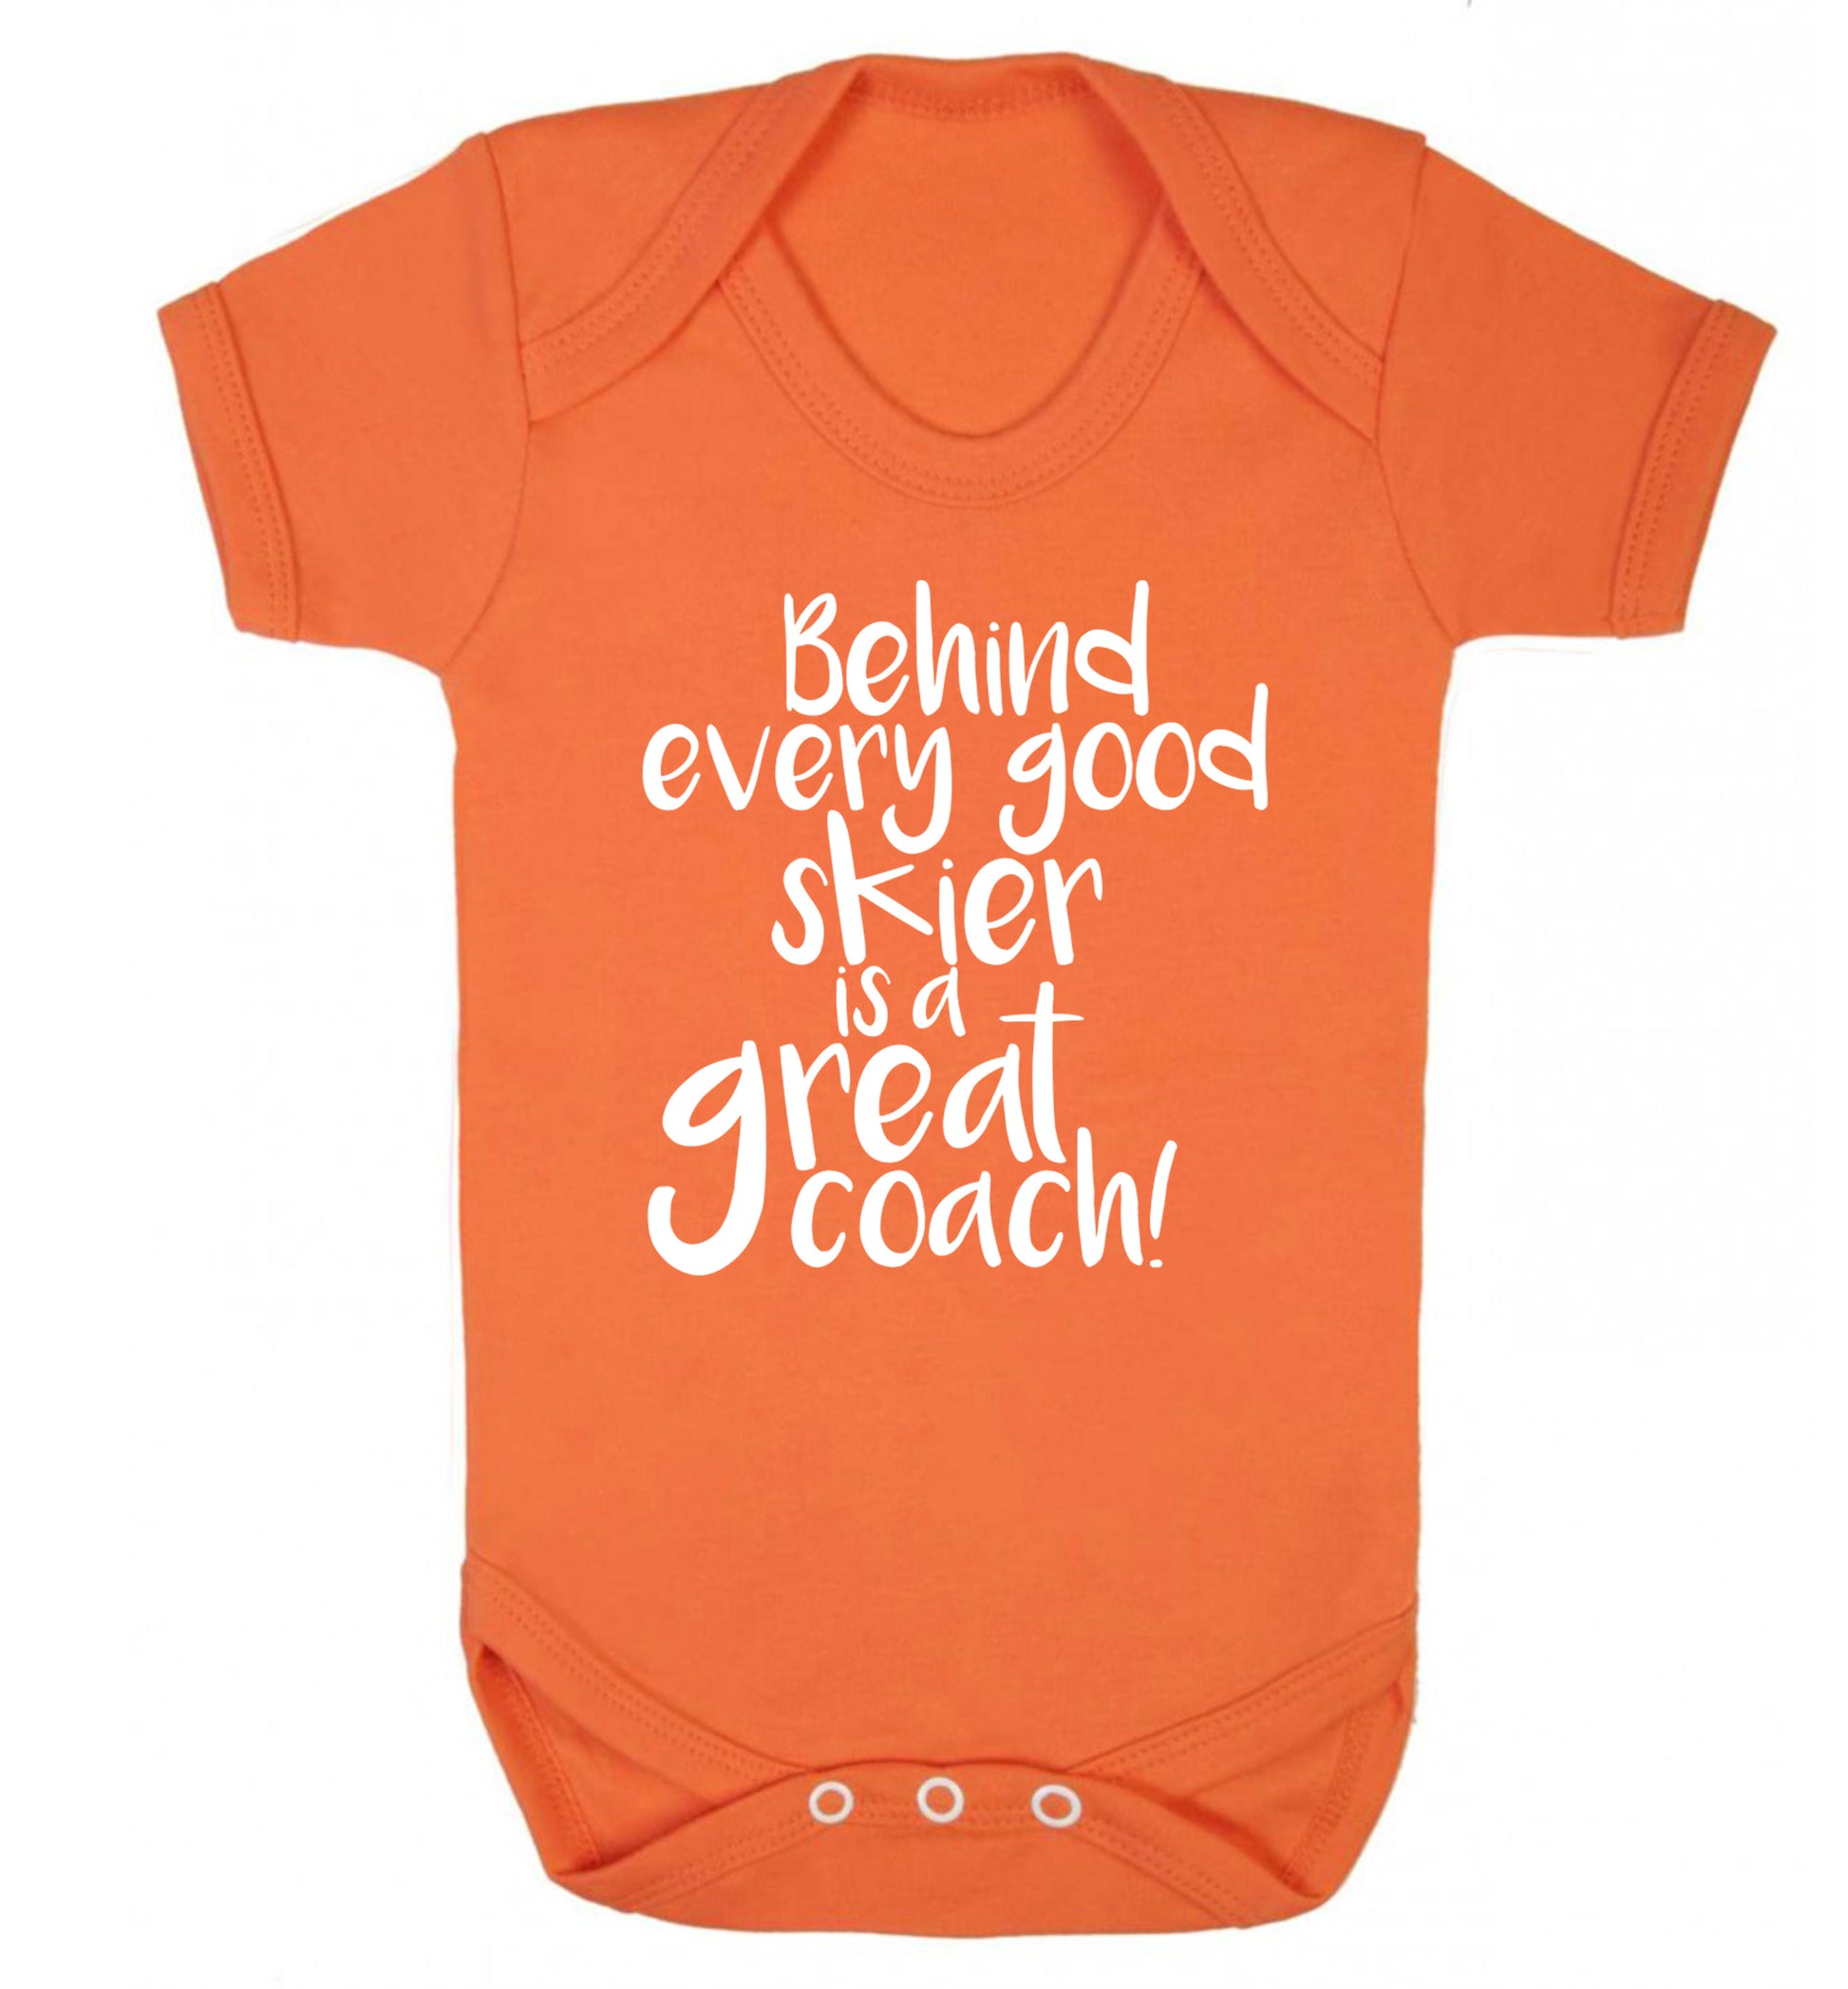 Behind every good skier is a great coach! Baby Vest orange 18-24 months